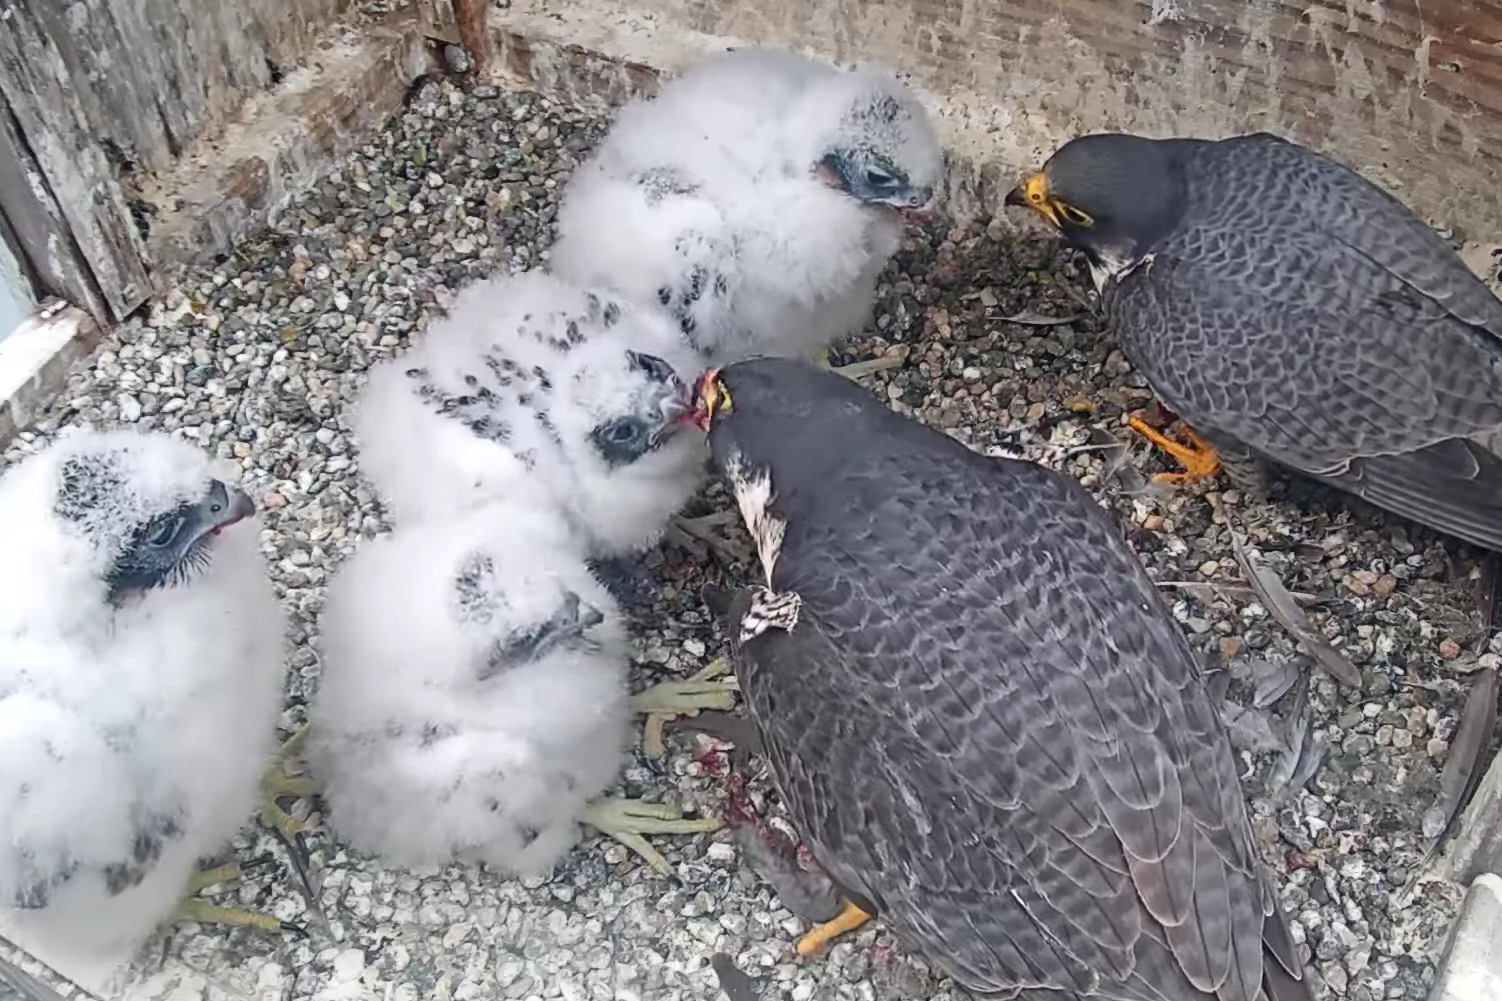 Annie and Archie, Berkeley's falcon parents, feed their four fluffy white chicks in their gravel nest box on the Campanile.